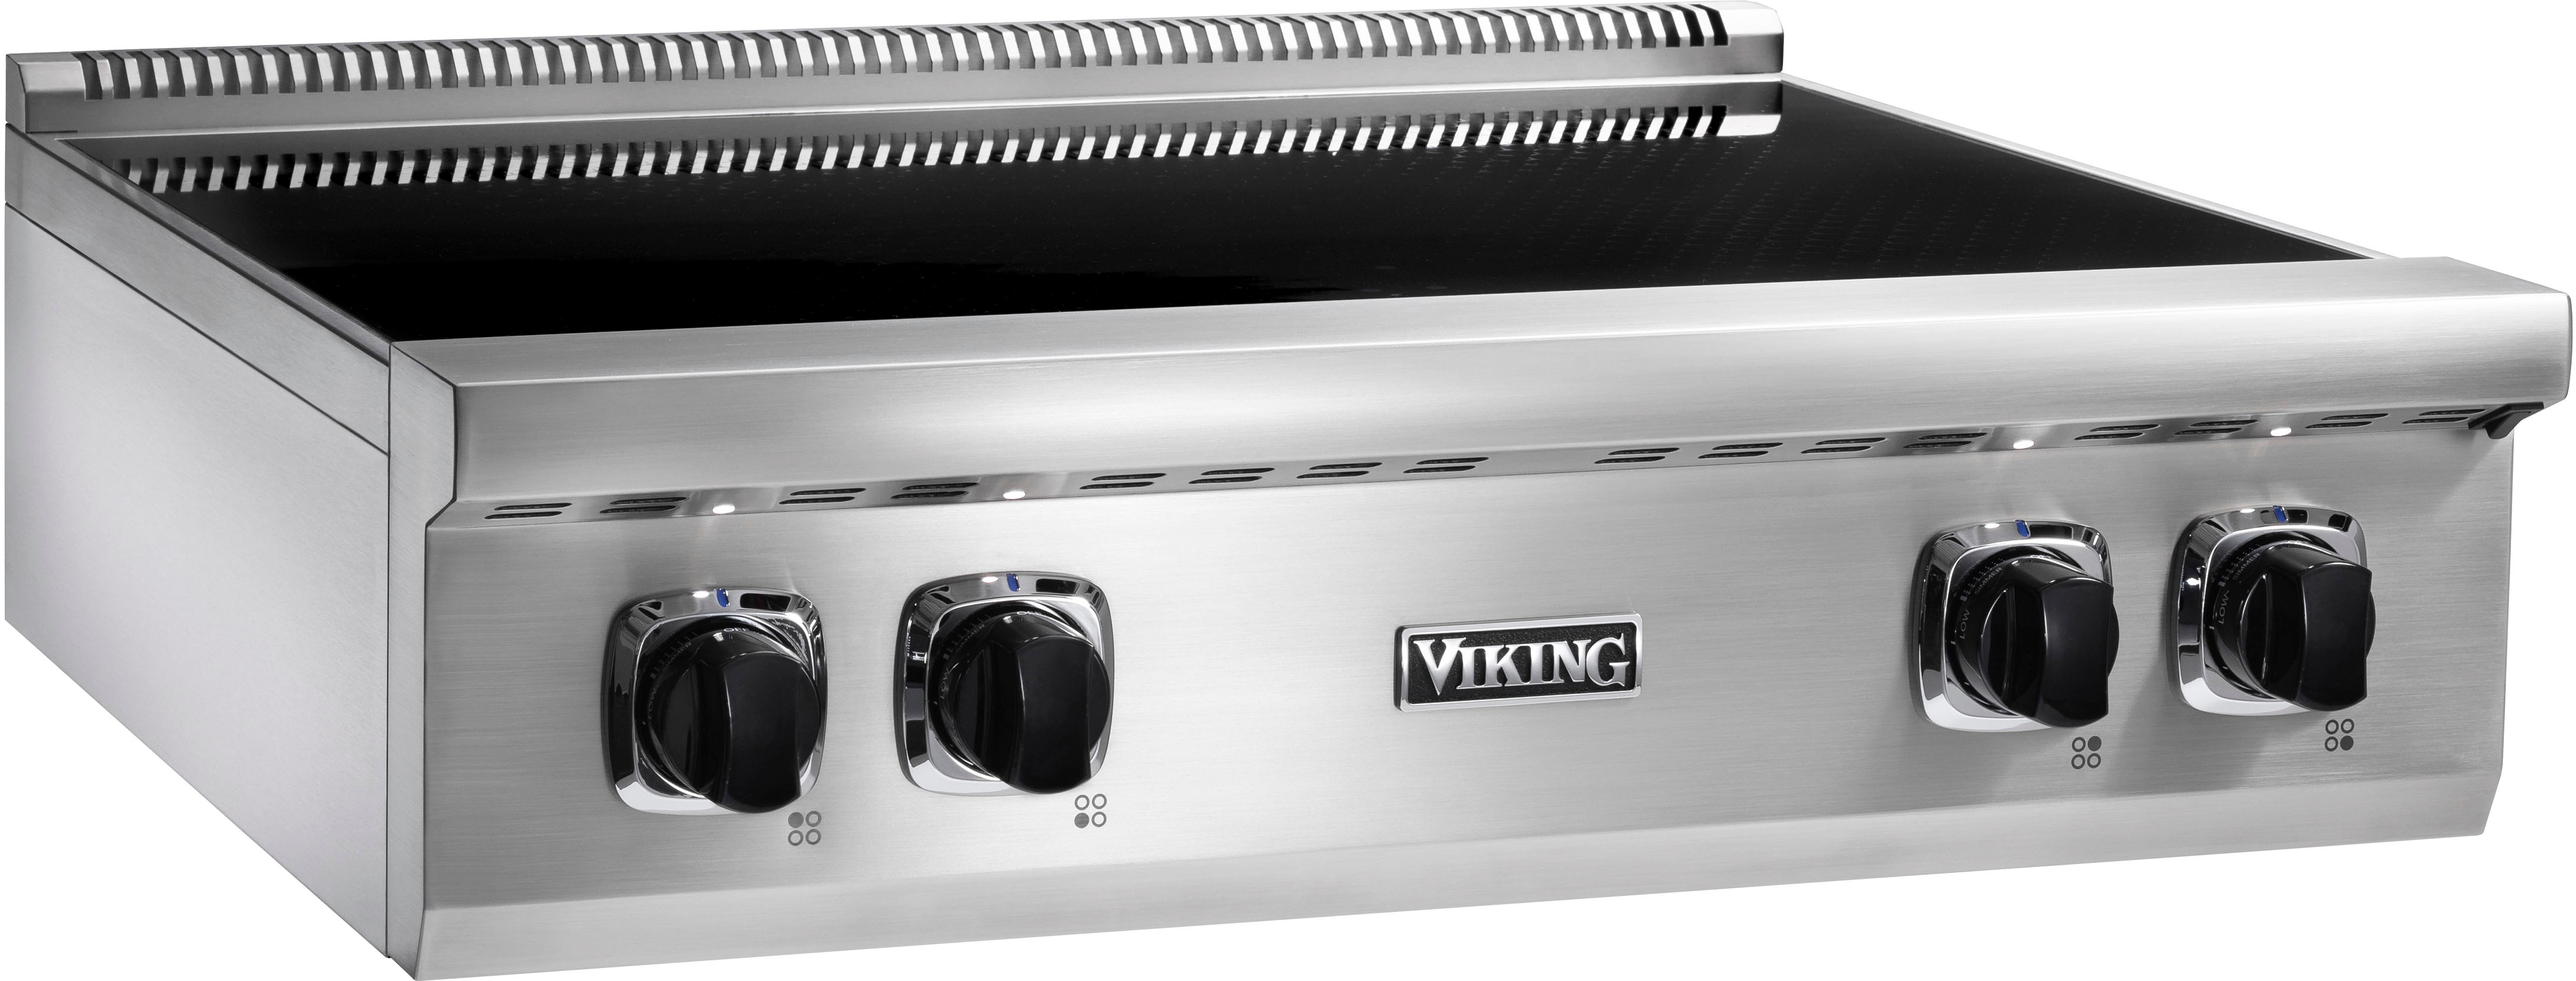 Viking VIR53024BDG 30 5 Series Induction Range with 4 Elements 4.7 Cu. ft. Oven Capacity MagneQuick Induction Power Heavy-Duty BlackChrome Knob